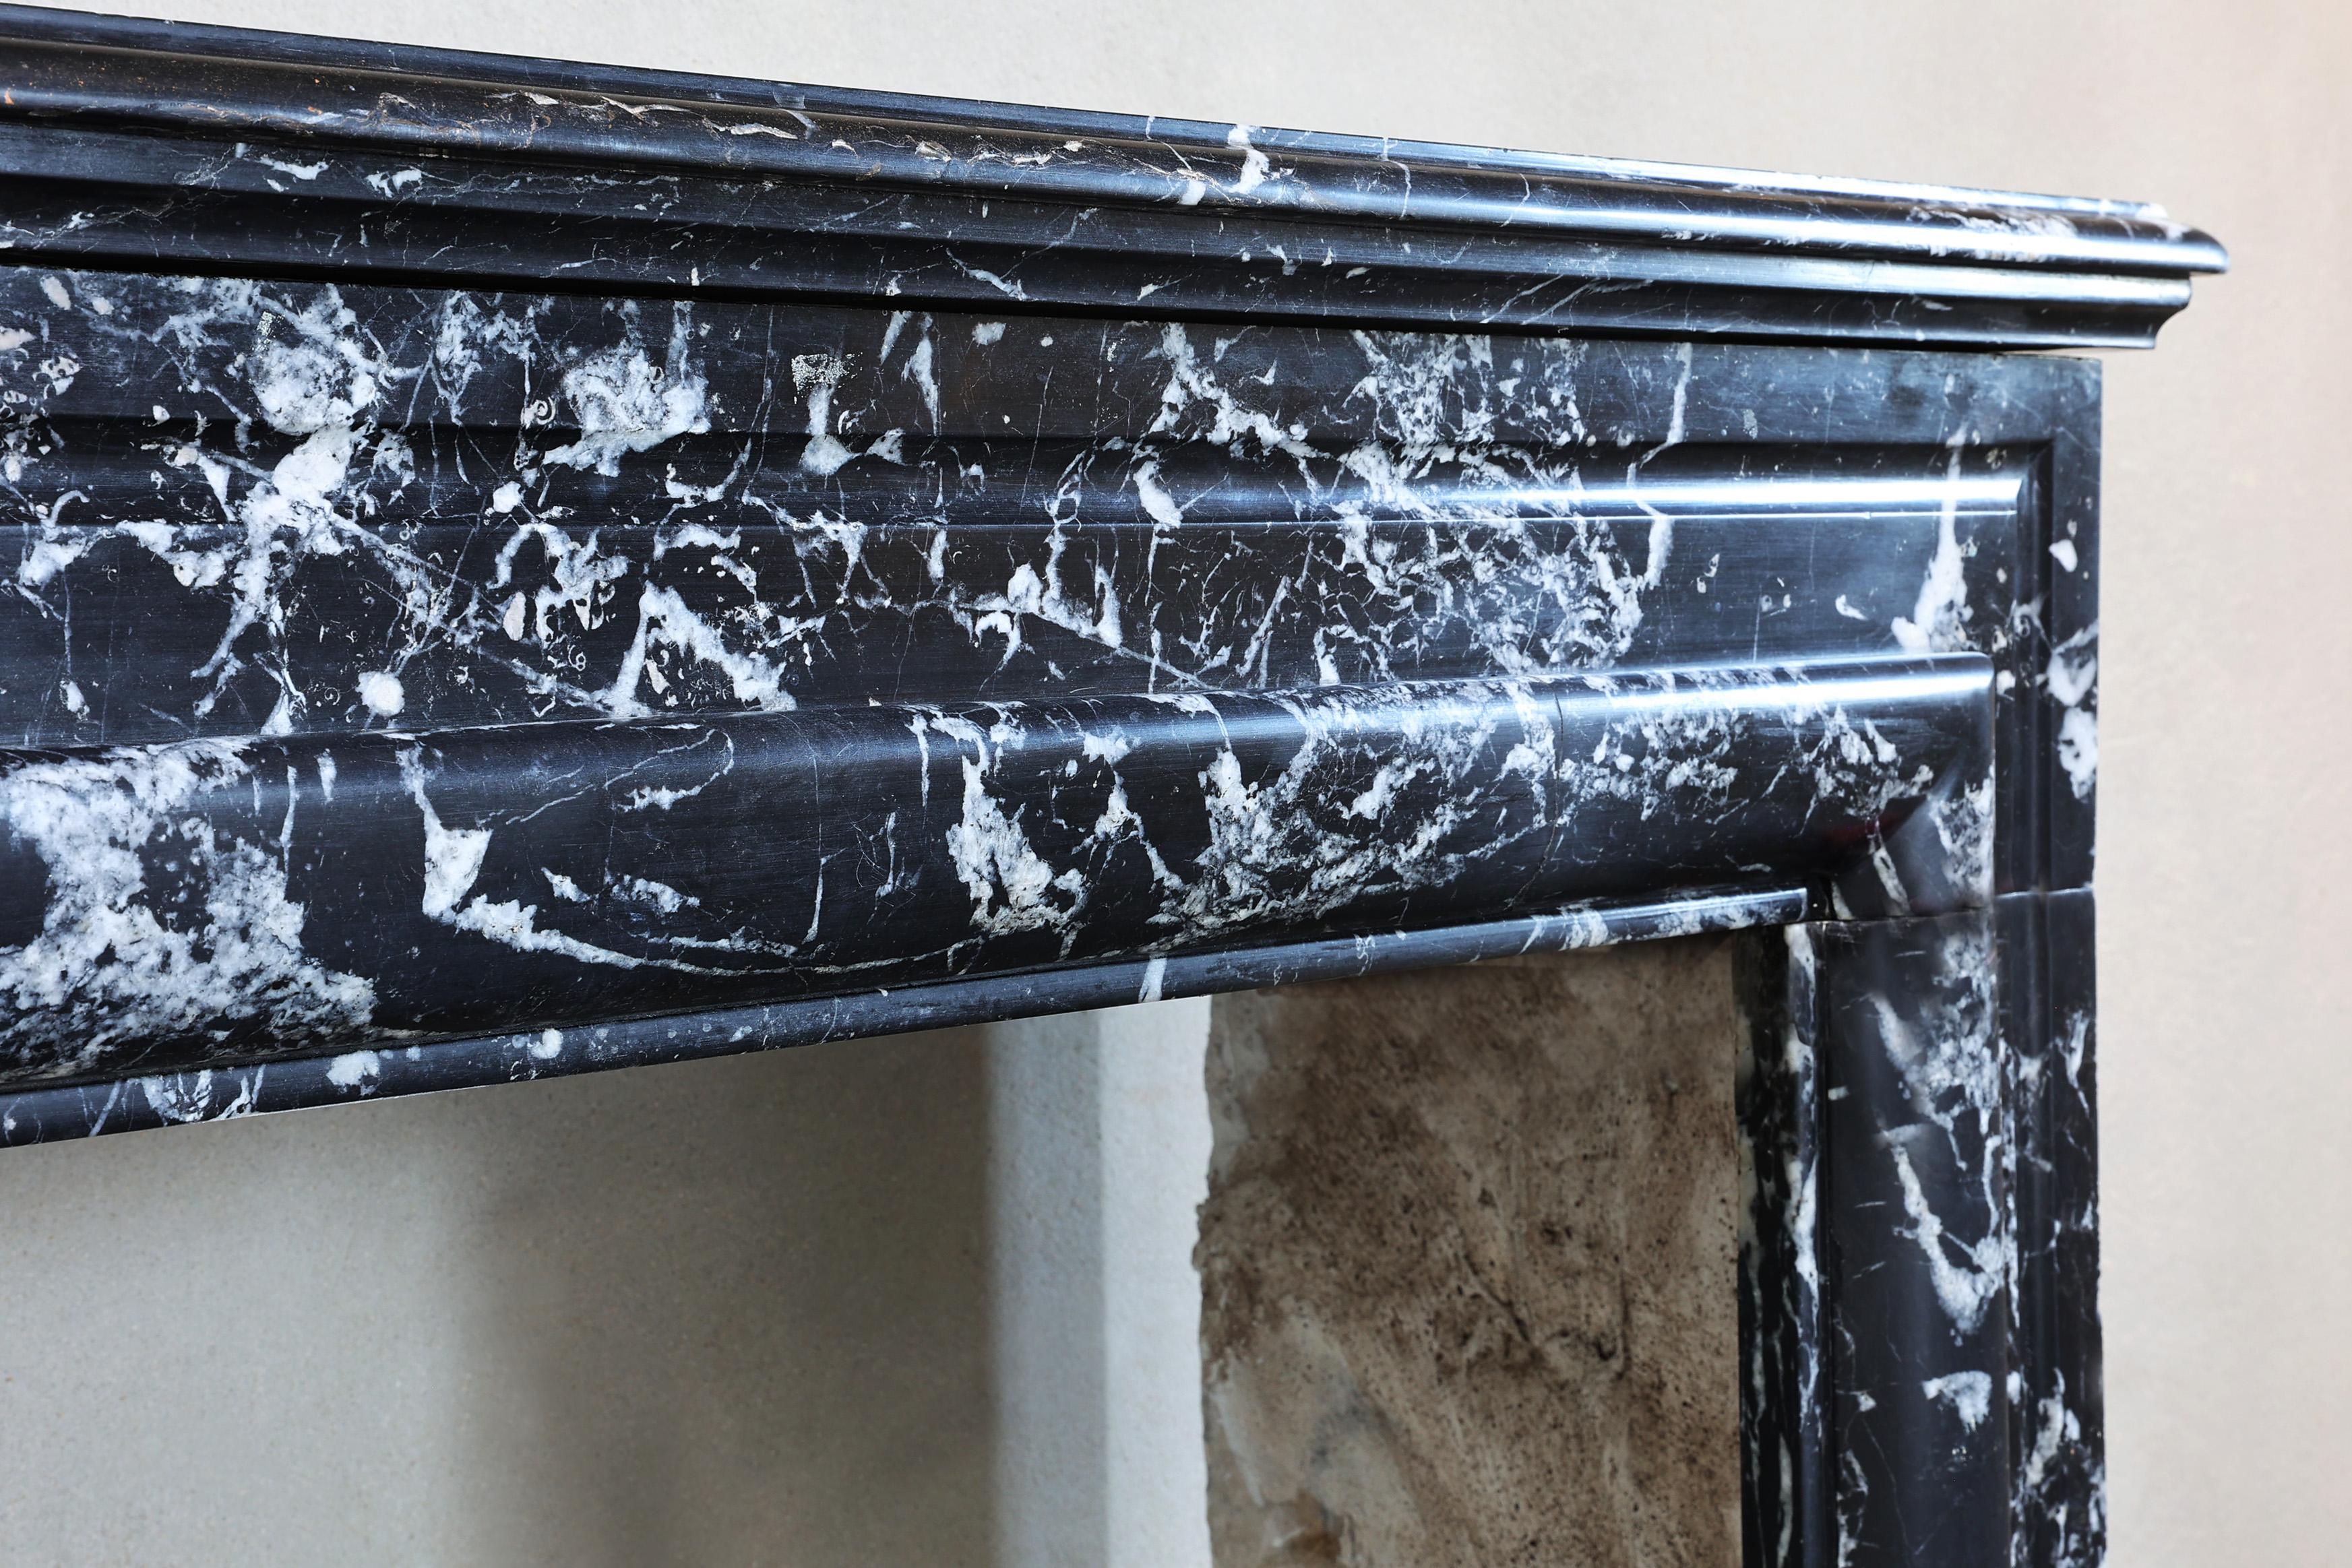 This antique Marquina marble fireplace in the style of Louis XVI comes from the 19th century and is a beautiful stylish piece of furniture for a classic or modern interior. This black and white marble is often used in classic styles that were